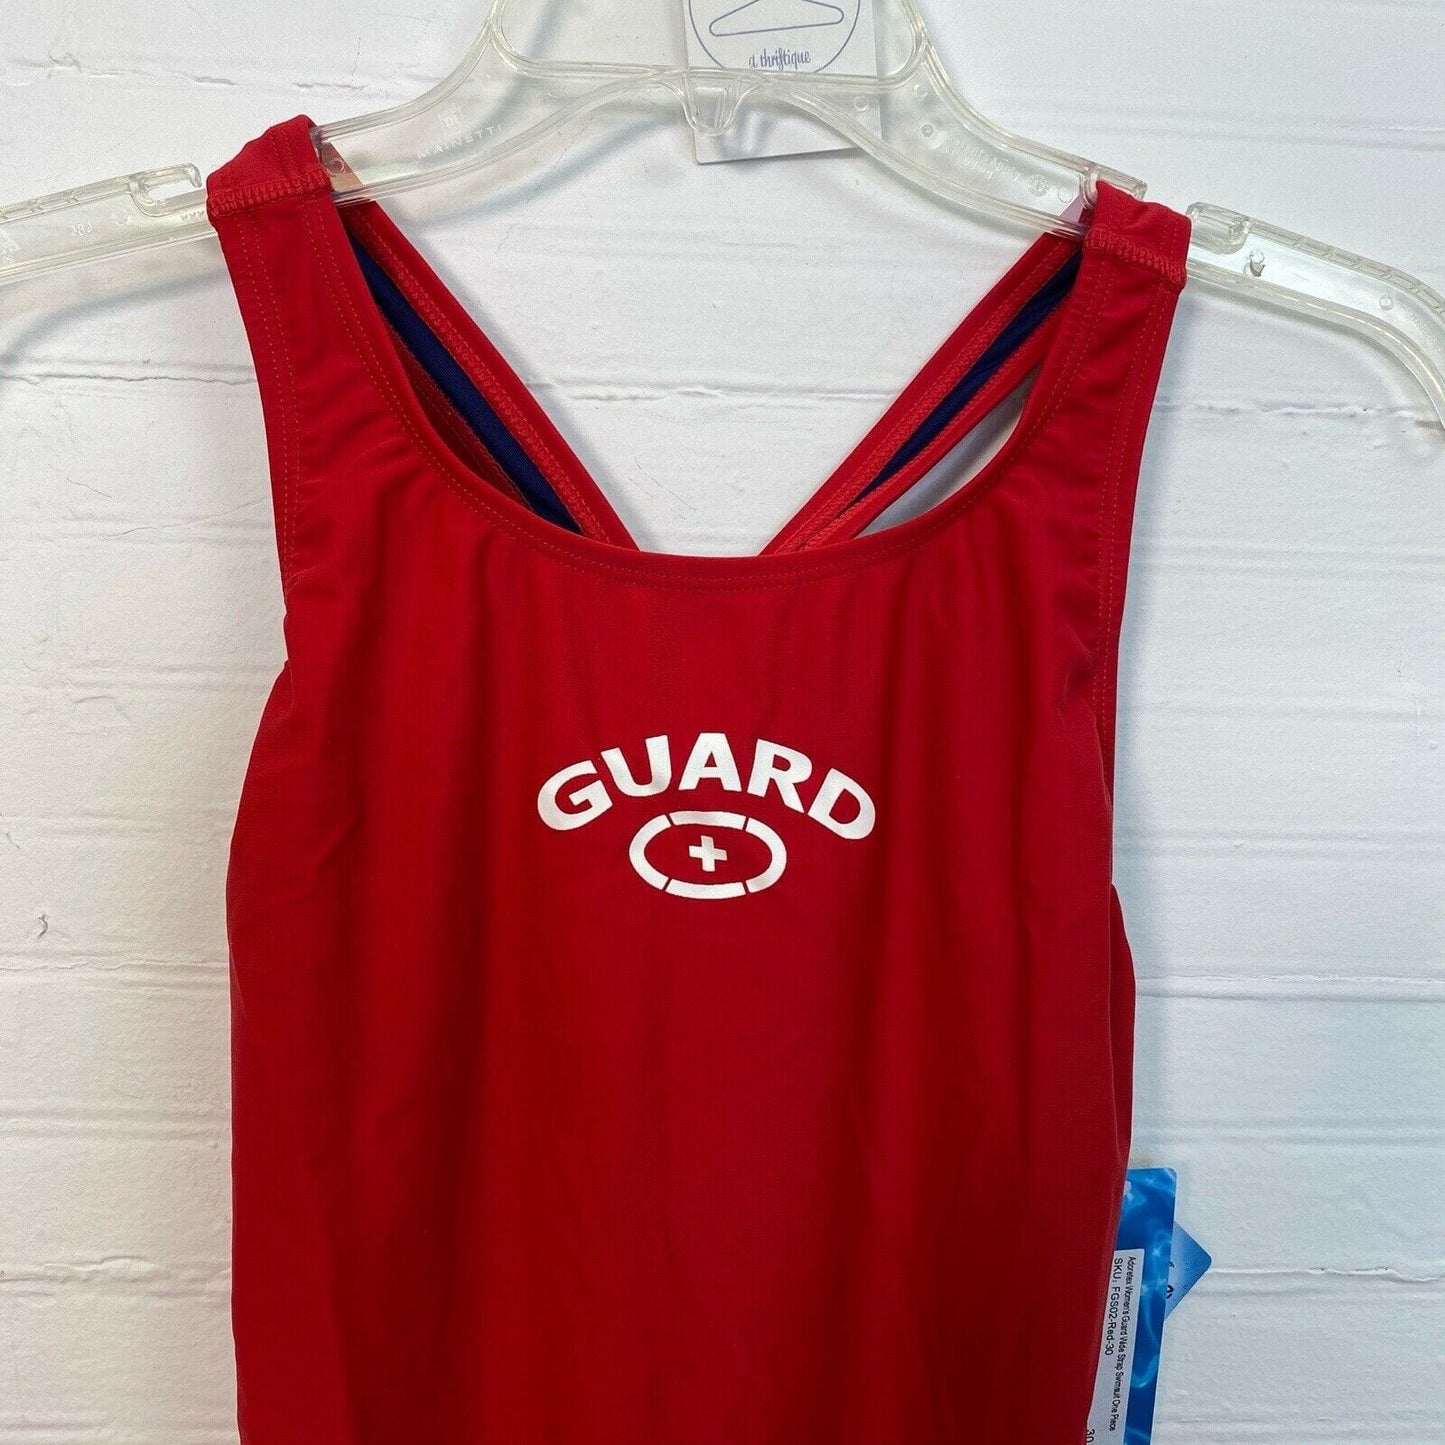 Adoretex Womens Guard Wide Strap One Piece Swimsuit, Red - Size 34 - NWT